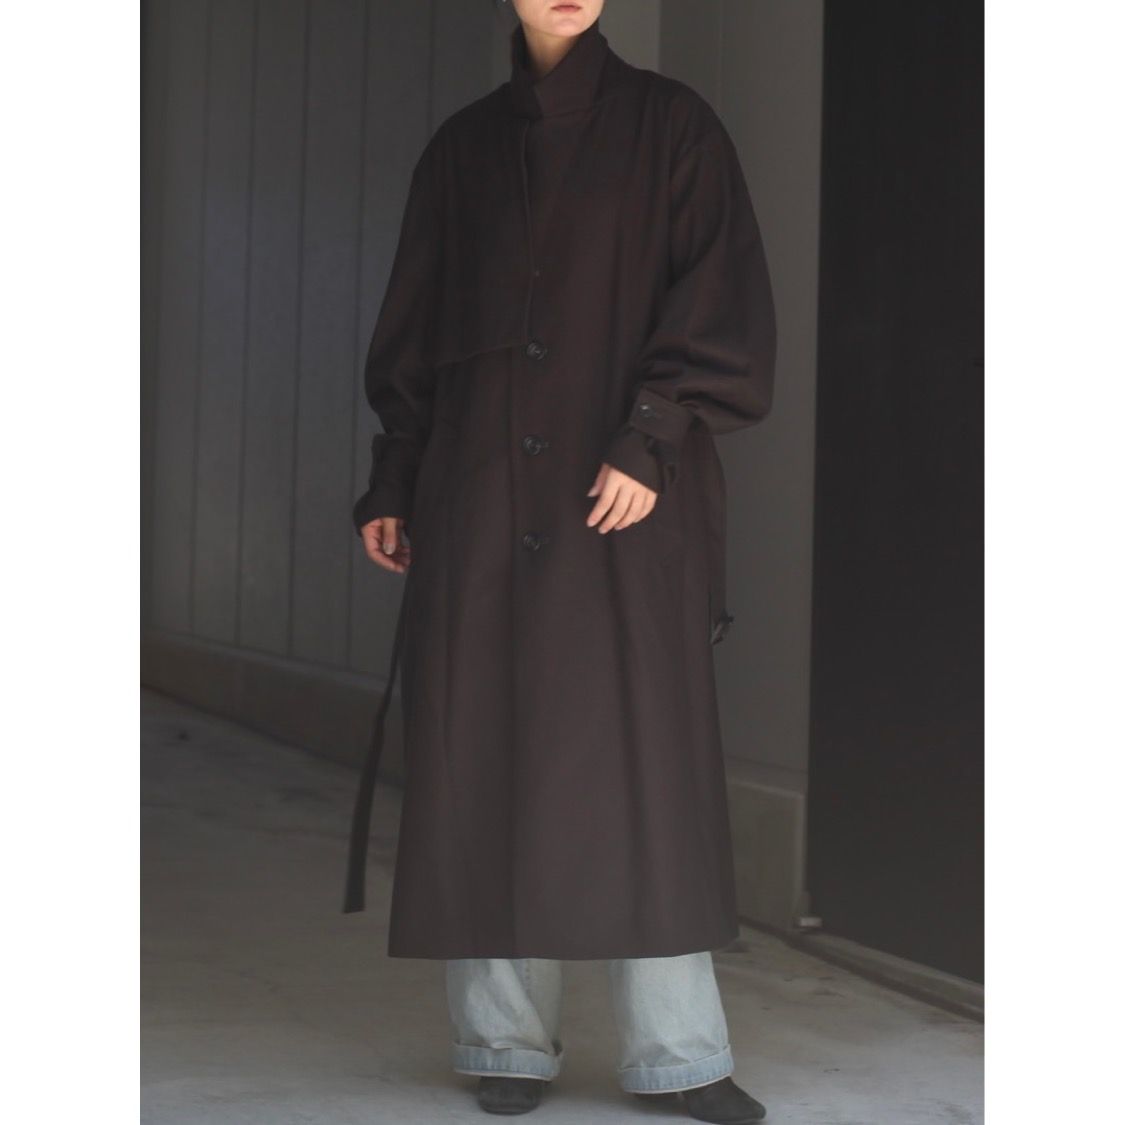 stein LAY CHESTER COAT+secpp.com.br